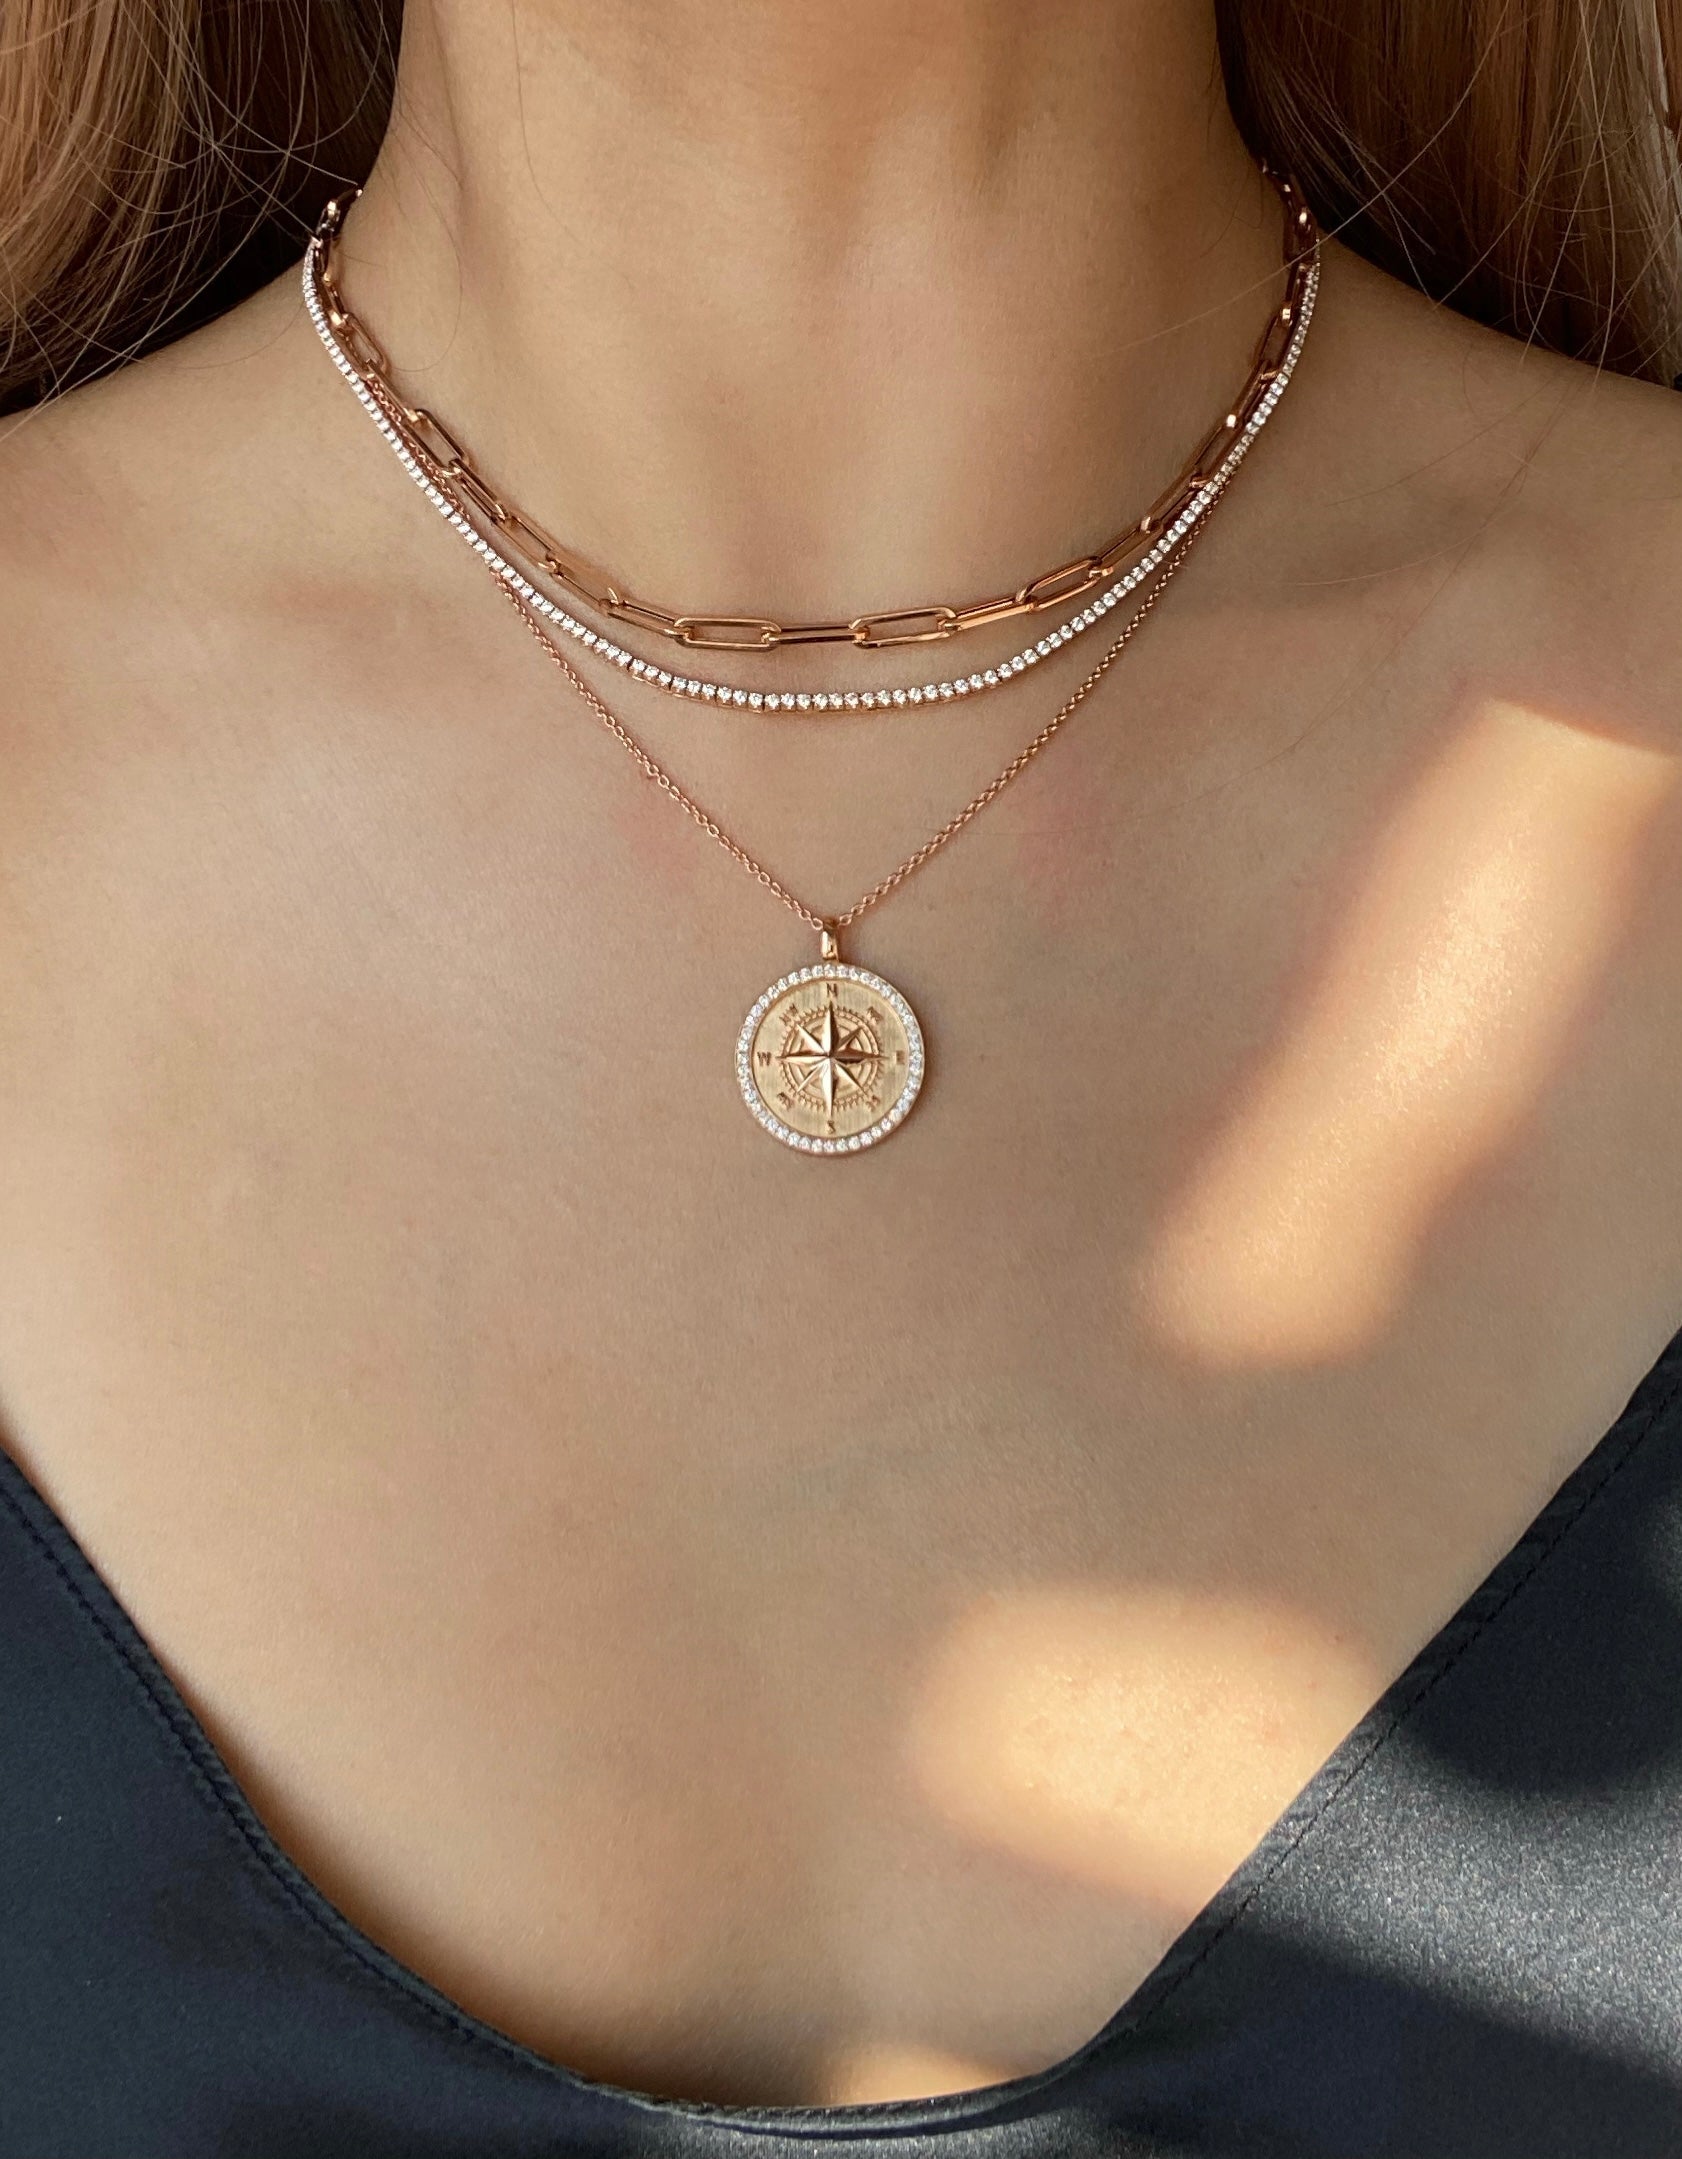 Diamond Compass Coin Necklace in Rose/White/Yellow Gold